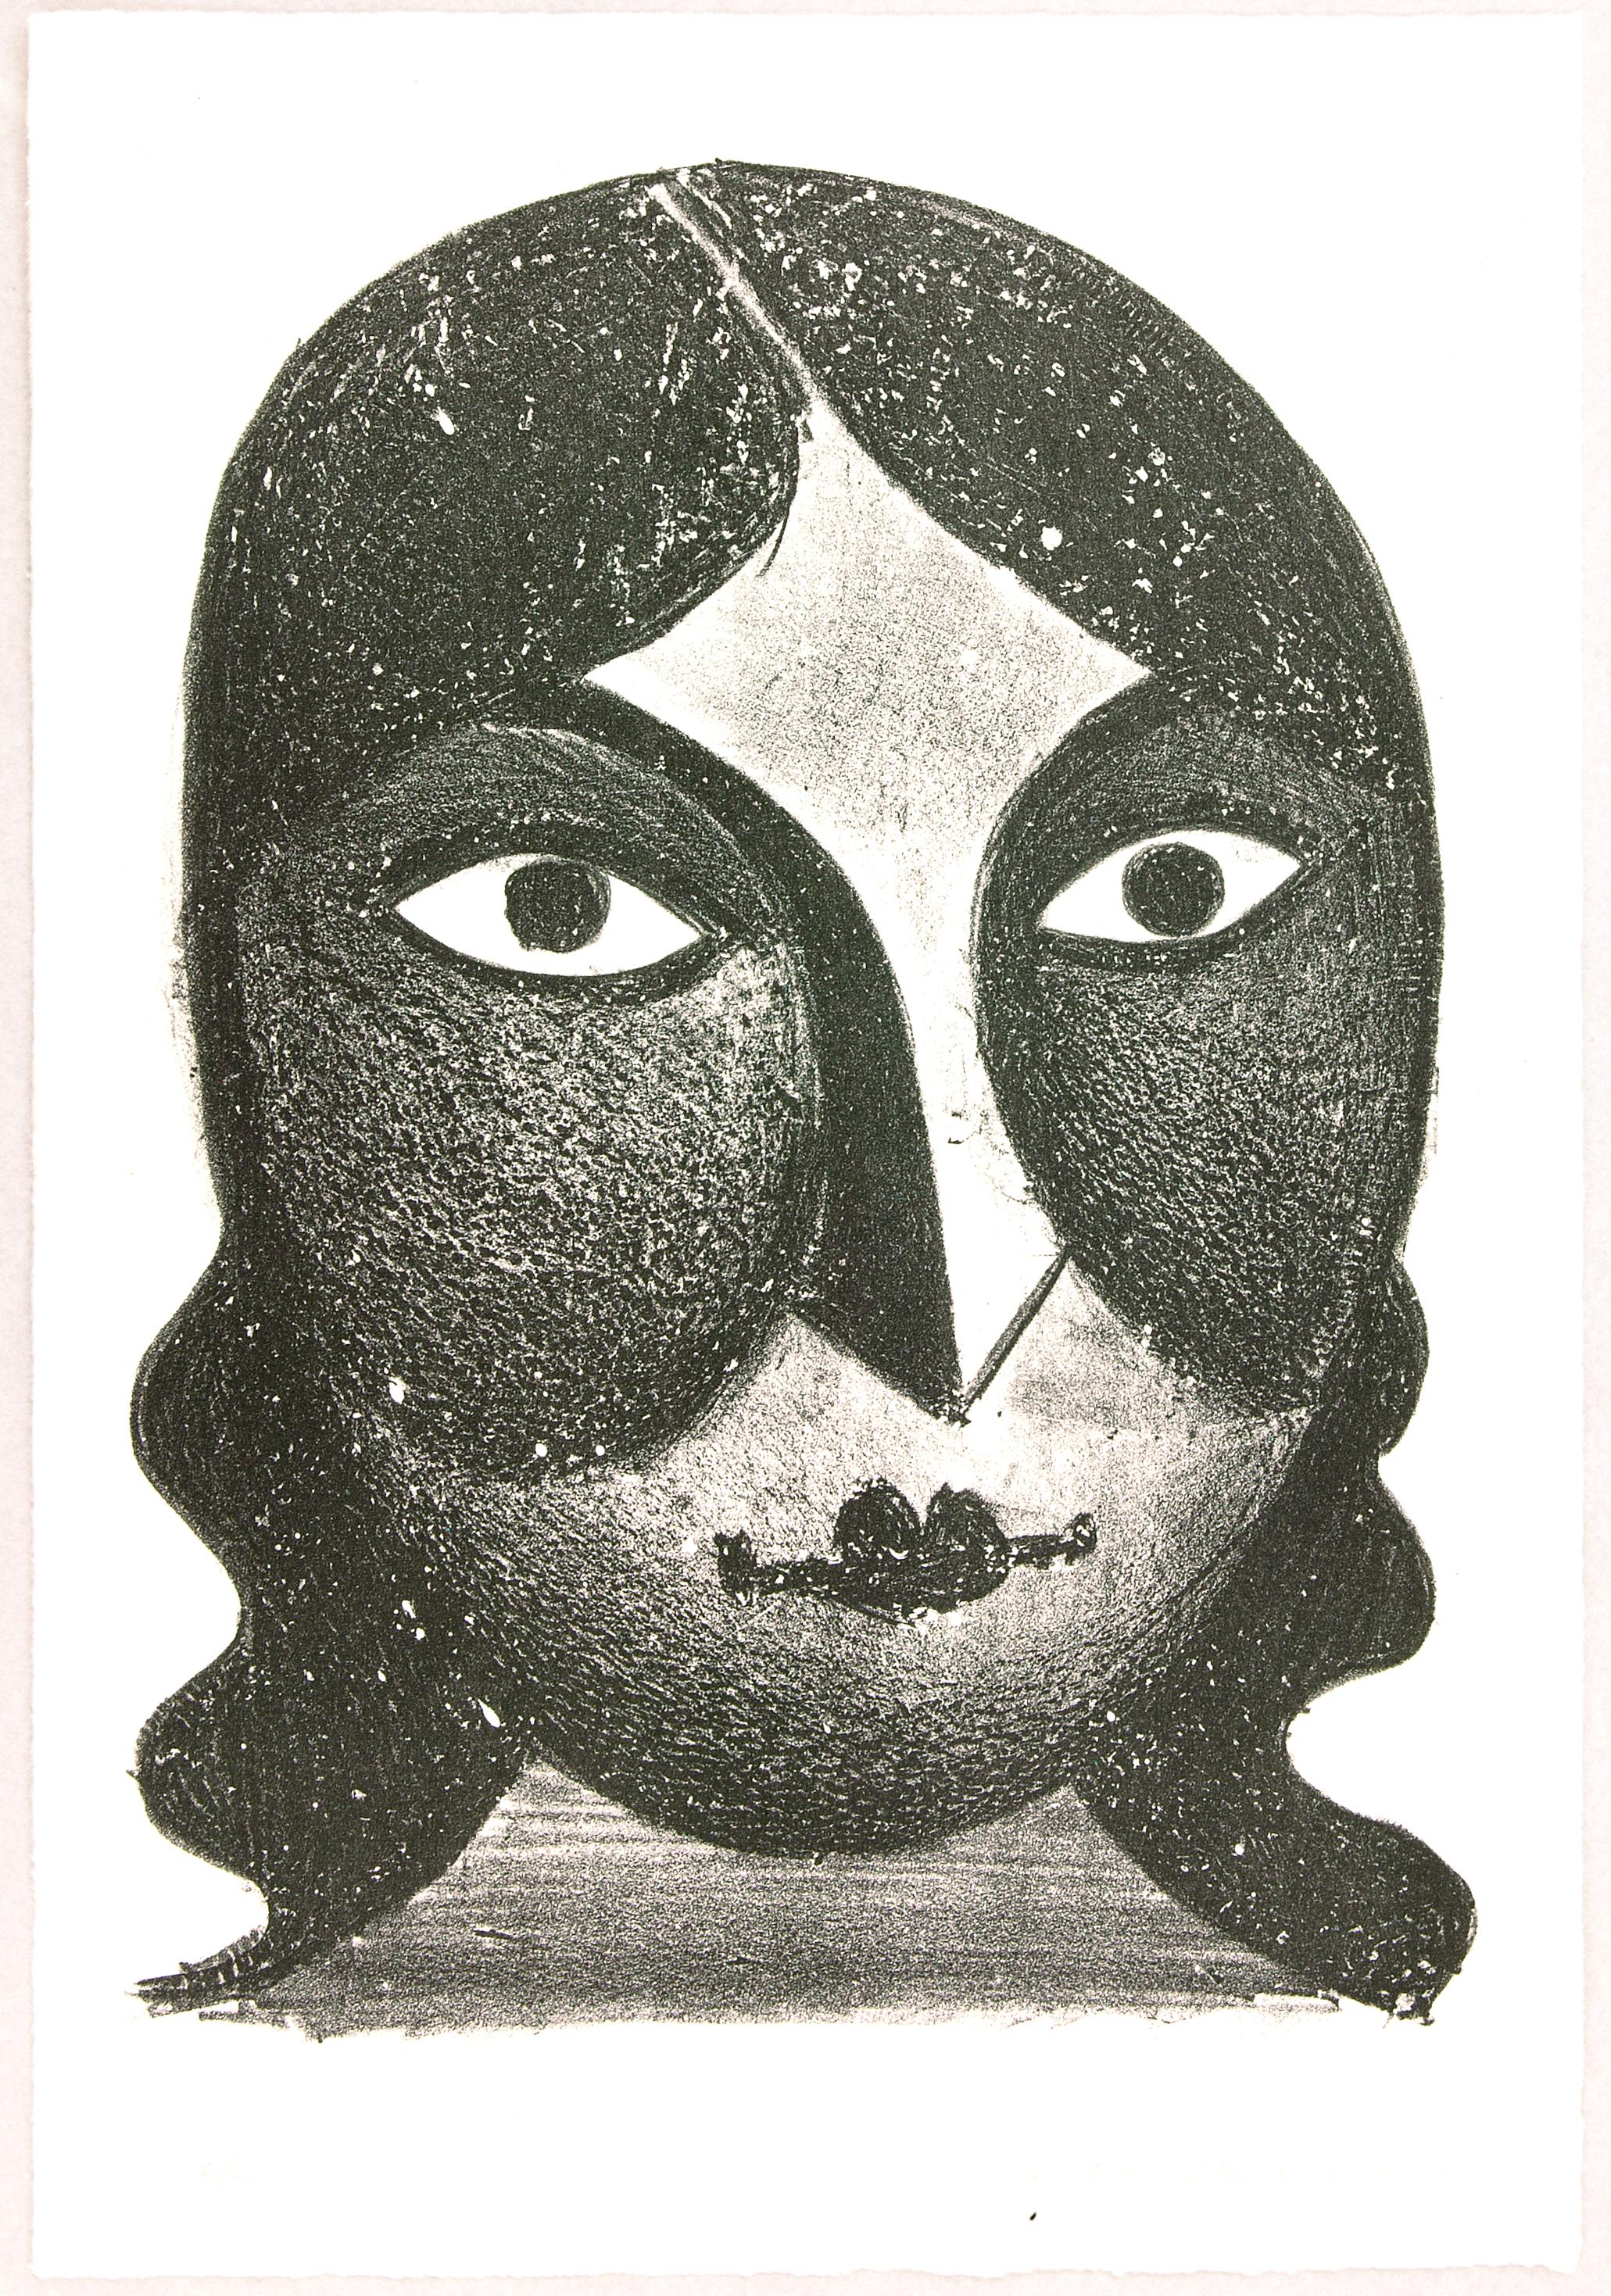 Christoph Ruckhaberle Figurative Print - Christoph Ruckhäberle Untitled, 2007 Edition 6 of 20, Lithograph, 15 x 10 inches